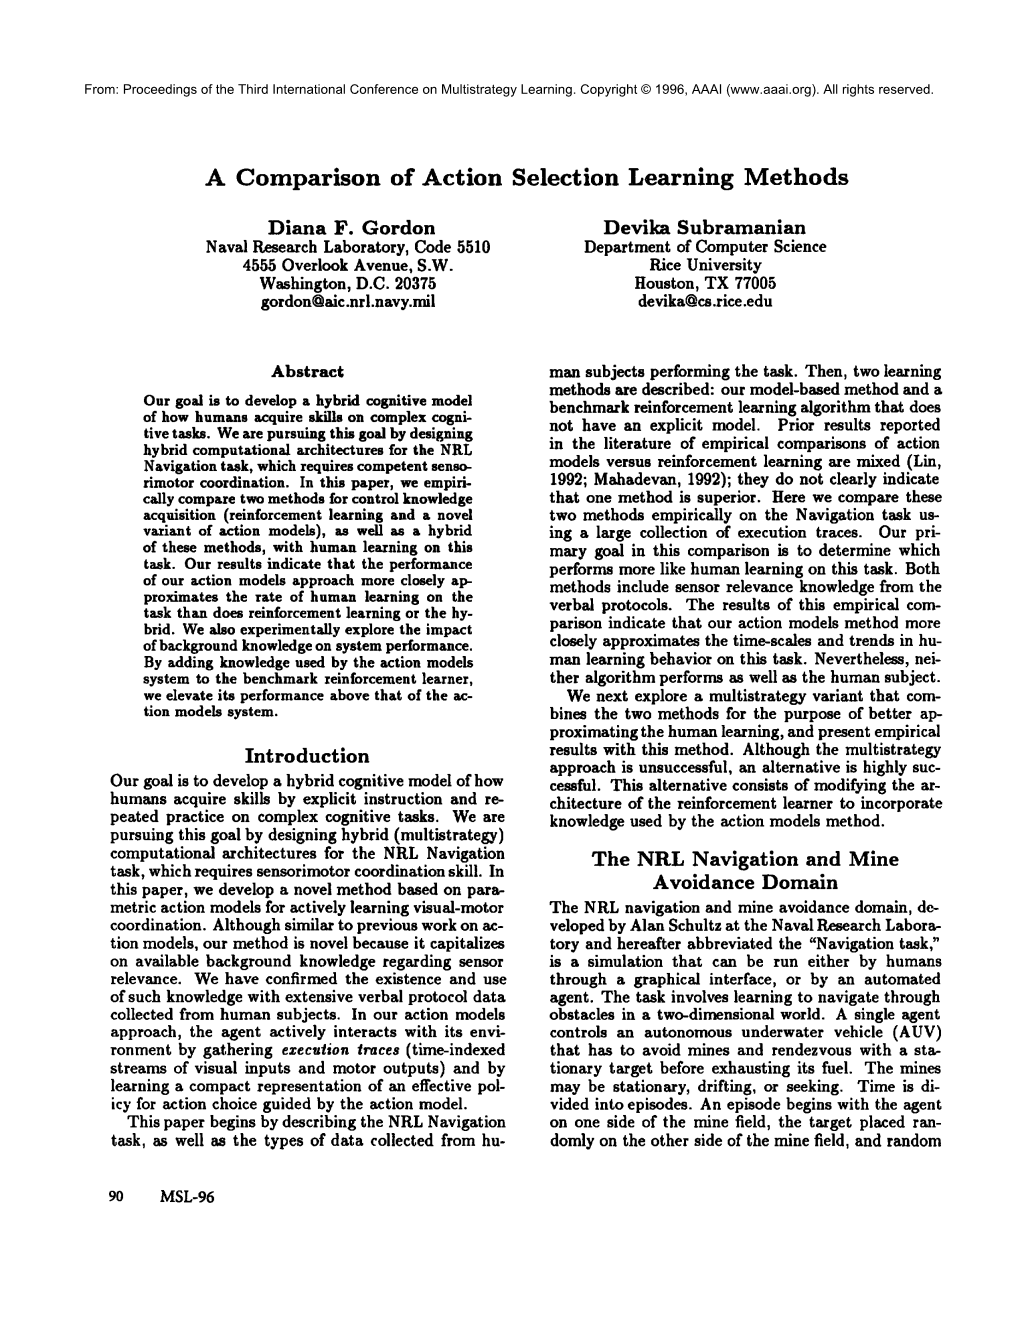 A Comparison of Action Selection Learning Methods